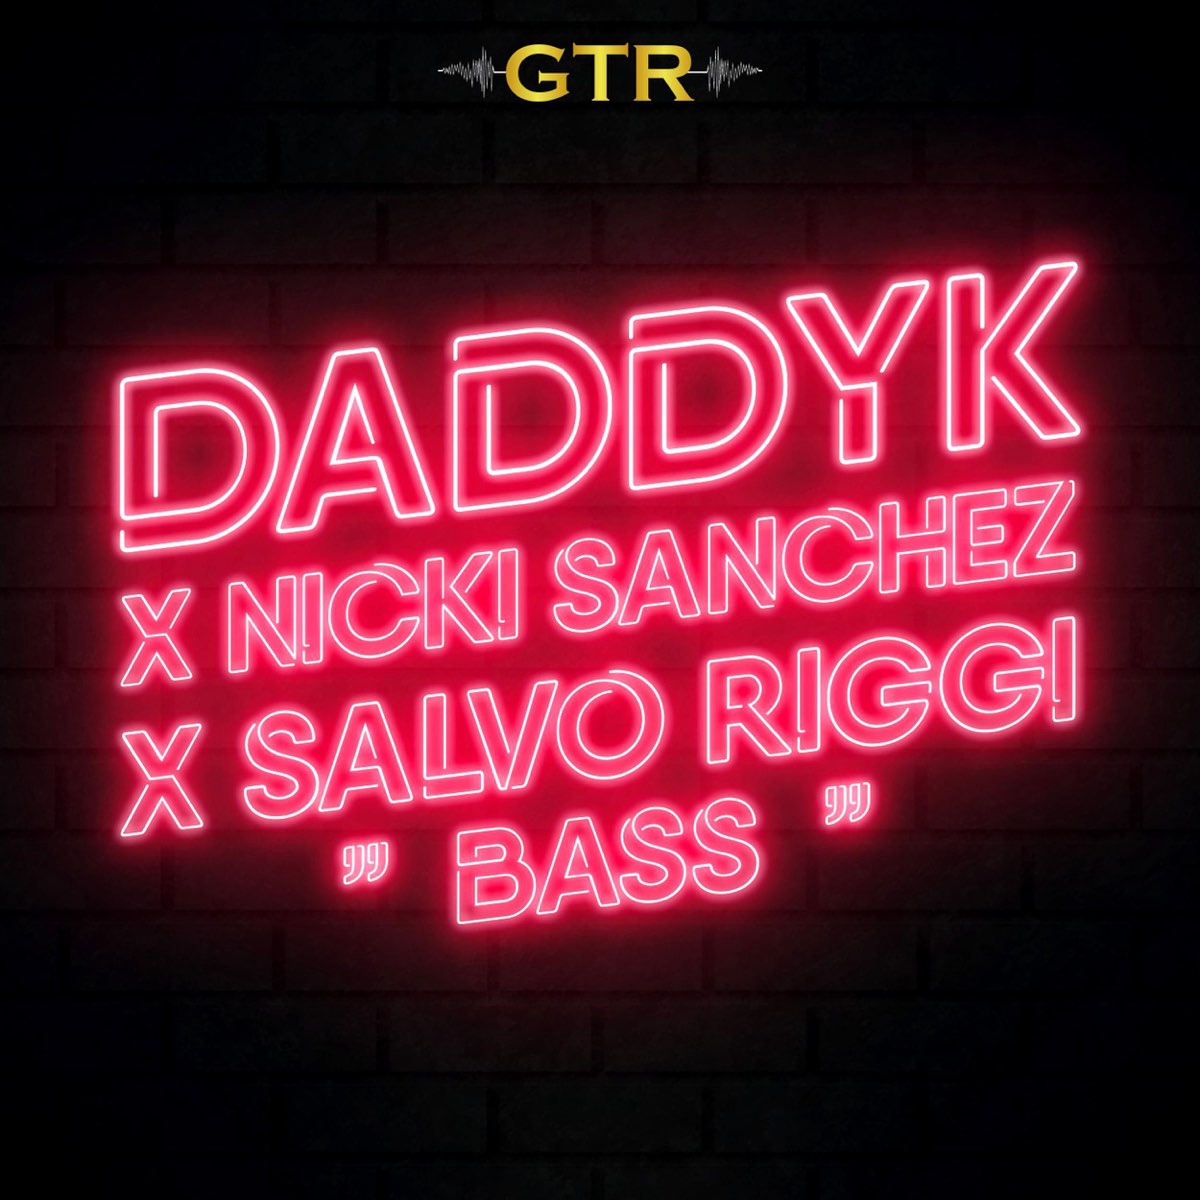 Bass extended mix. Daddy k.